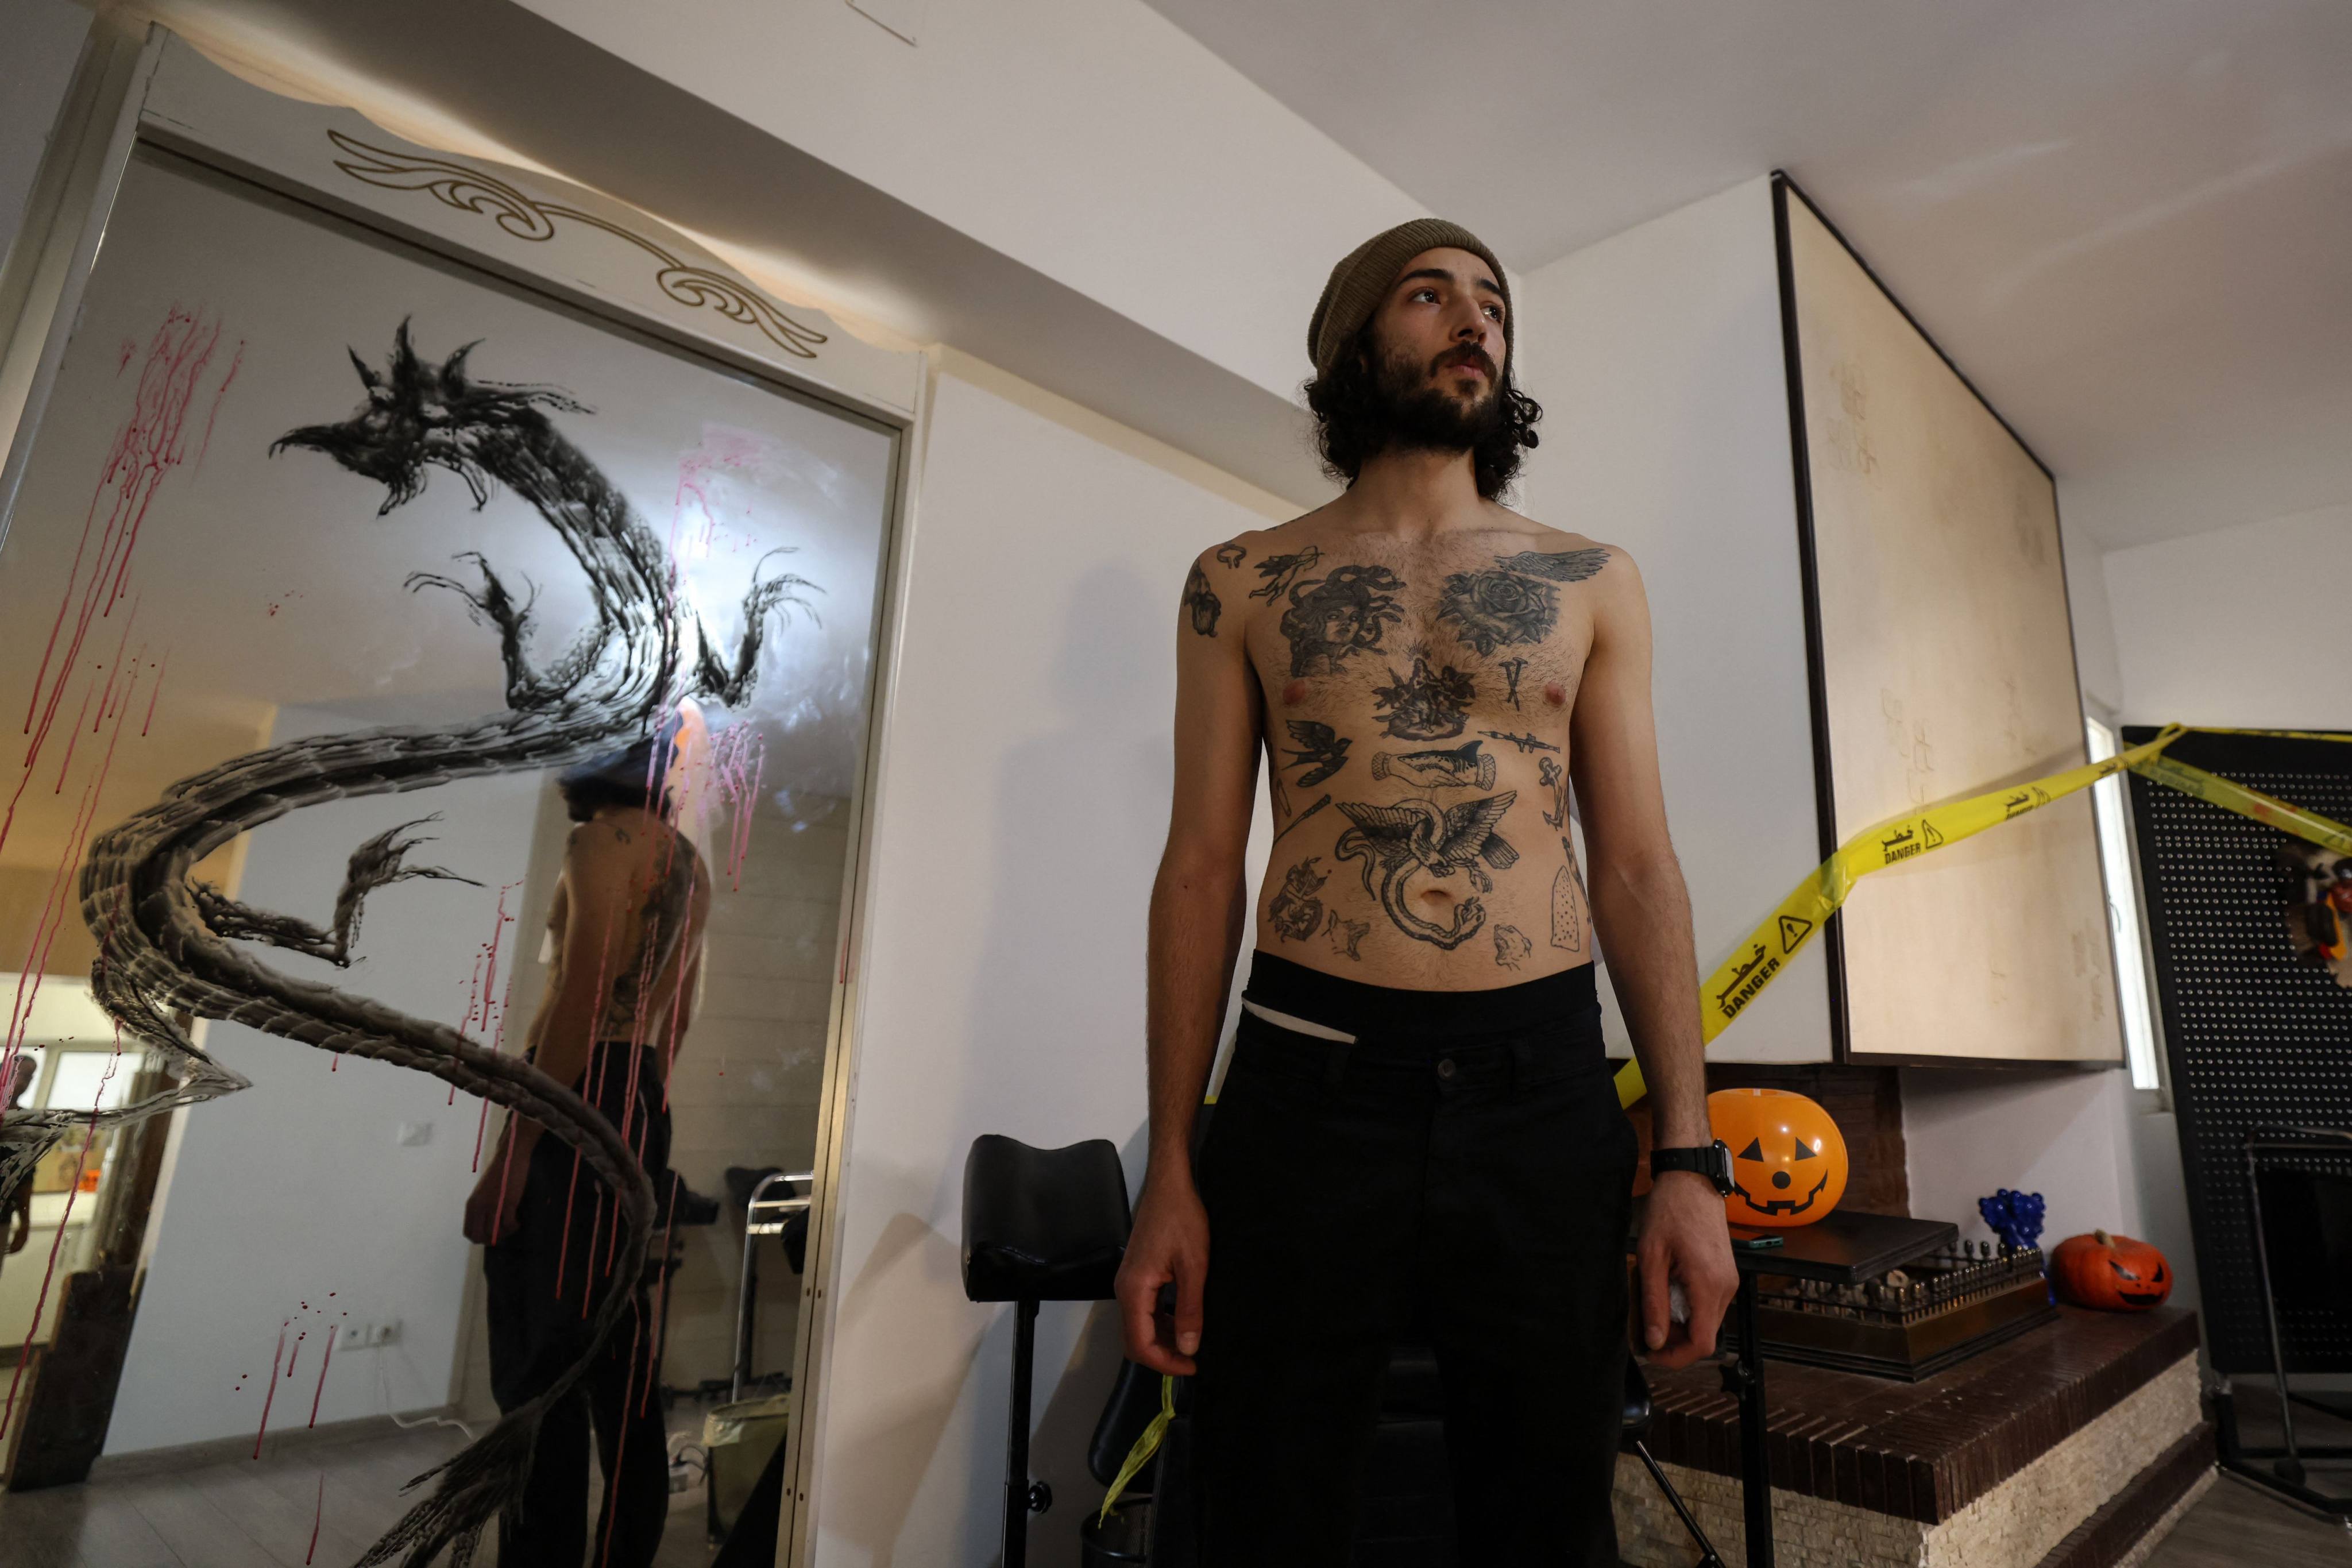 An Iranian man shows his tattoos in Iran’s capital, Tehran. Iranian tattoo artists have seen tattoos gain popularity in recent years, with some clients seeing them as a form of self-expression, others as an act of defiance against conservative Islam. Photo: AFP